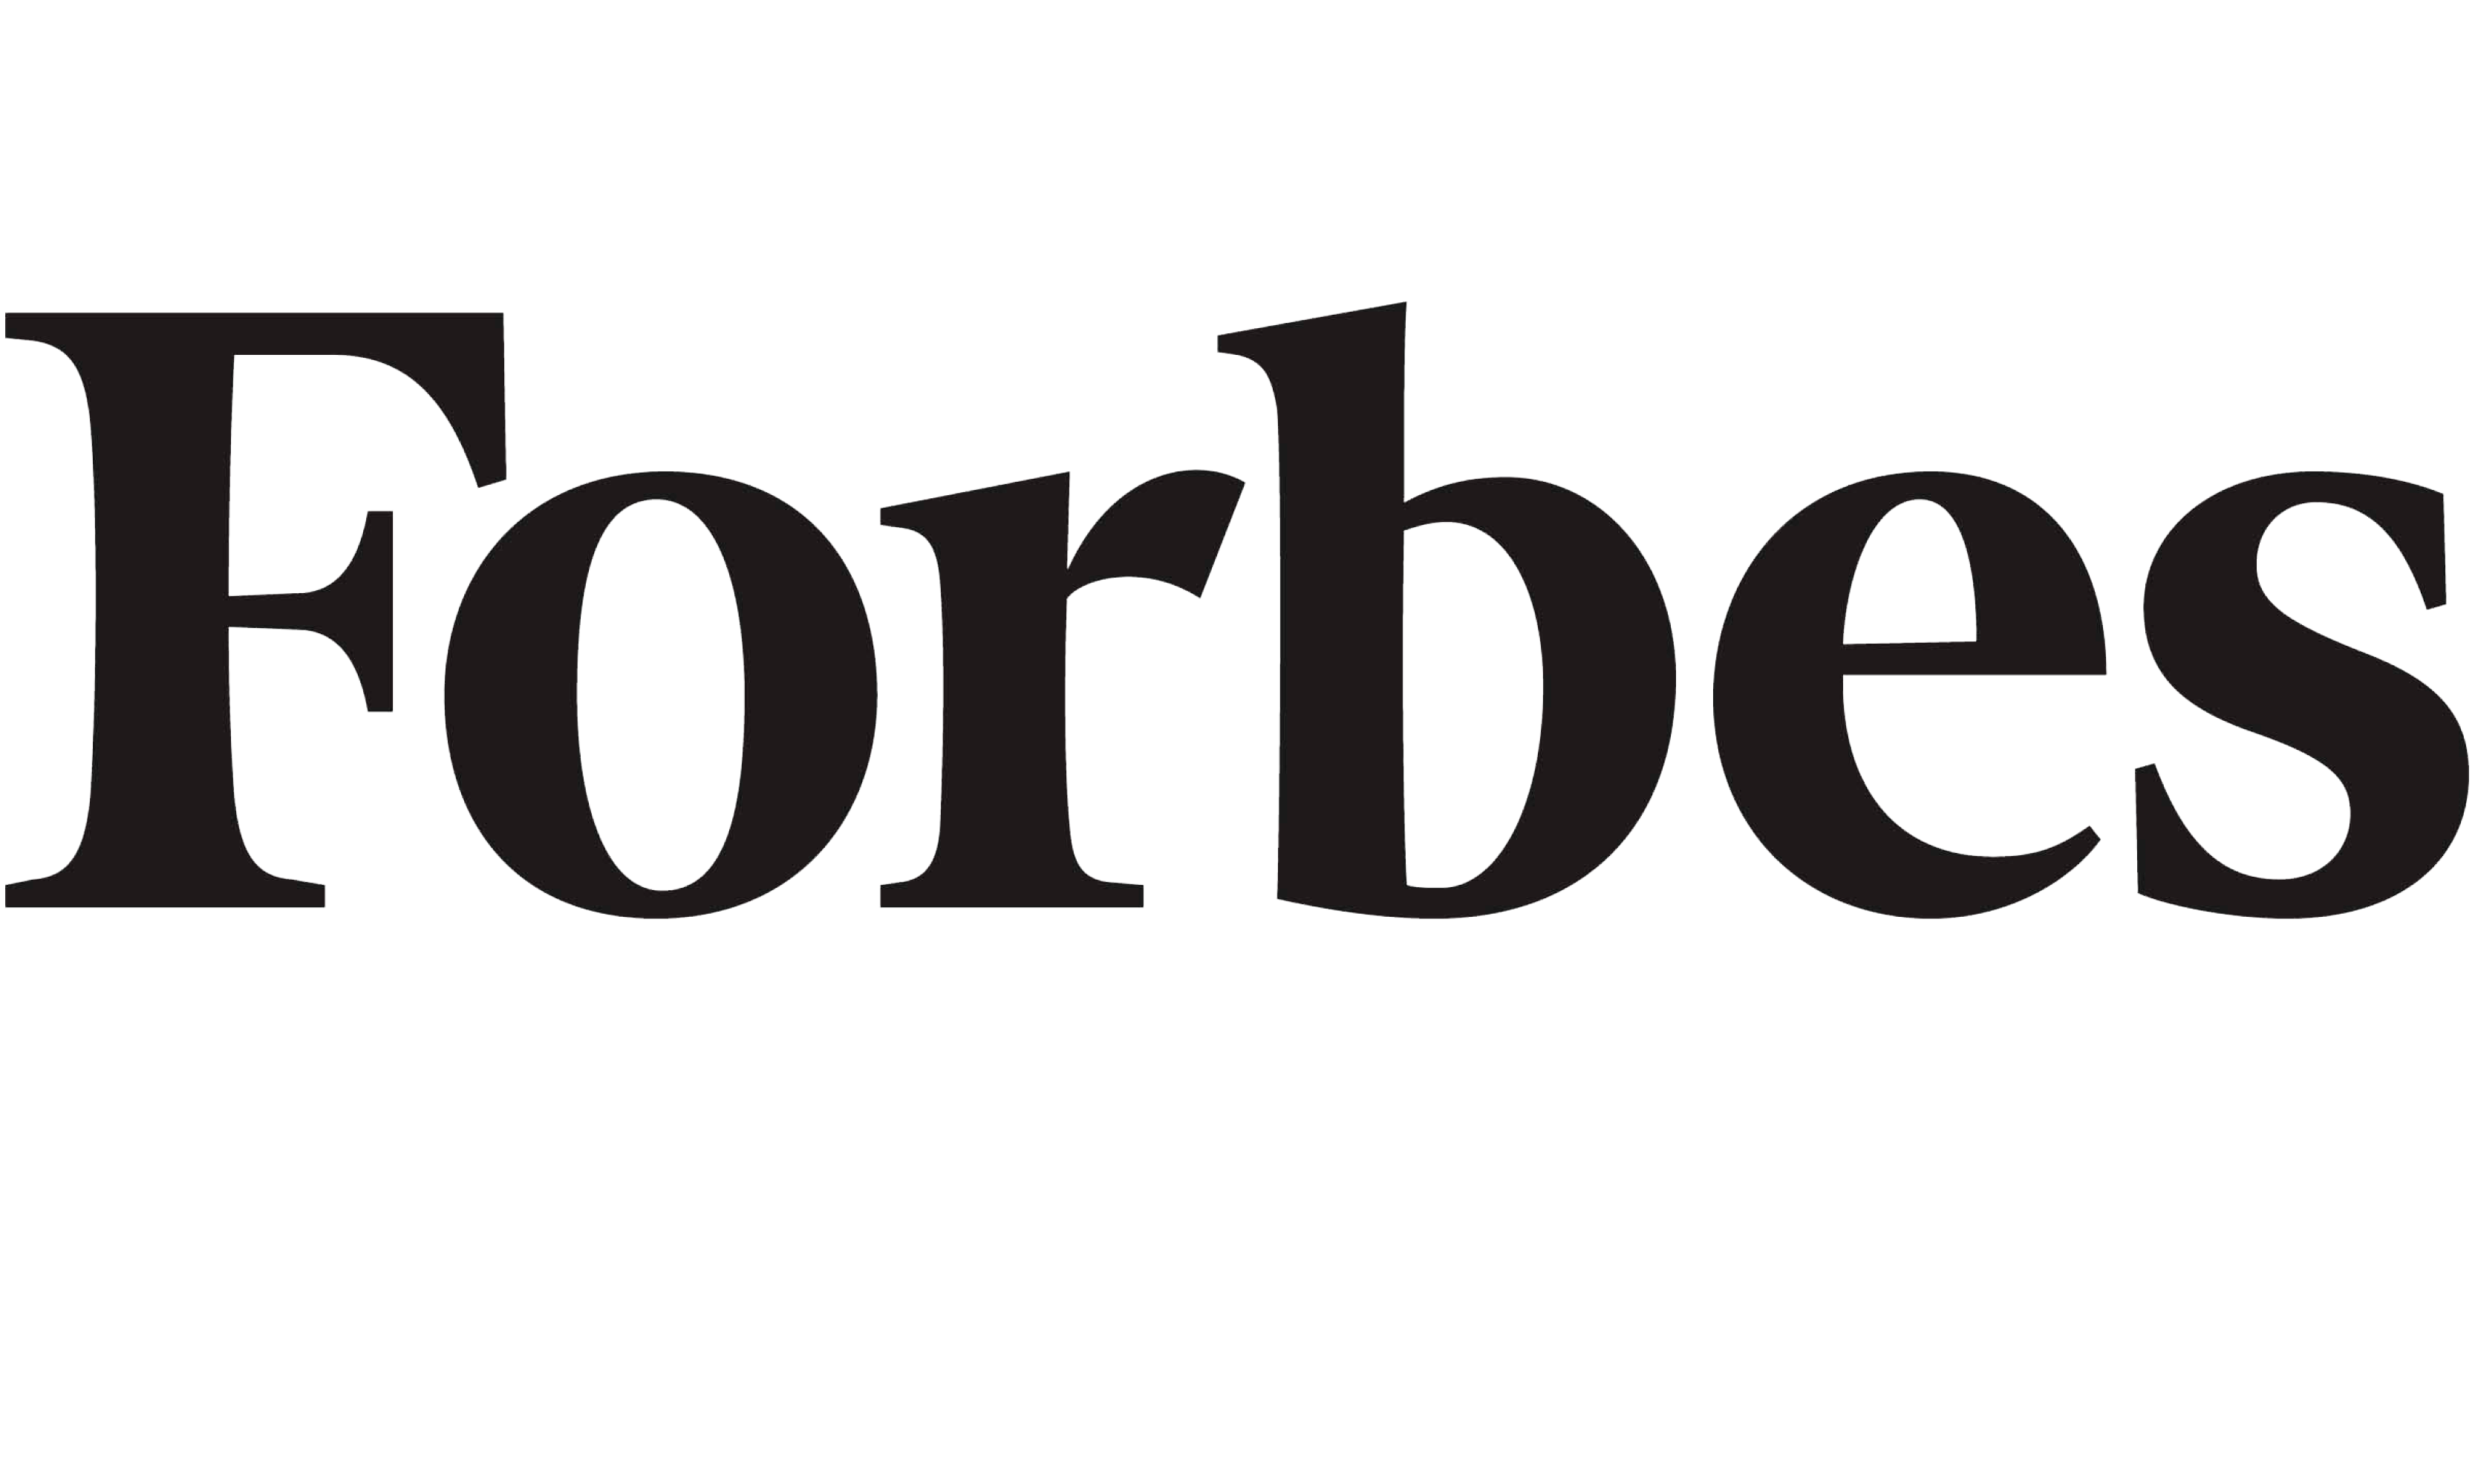 FORBES.png